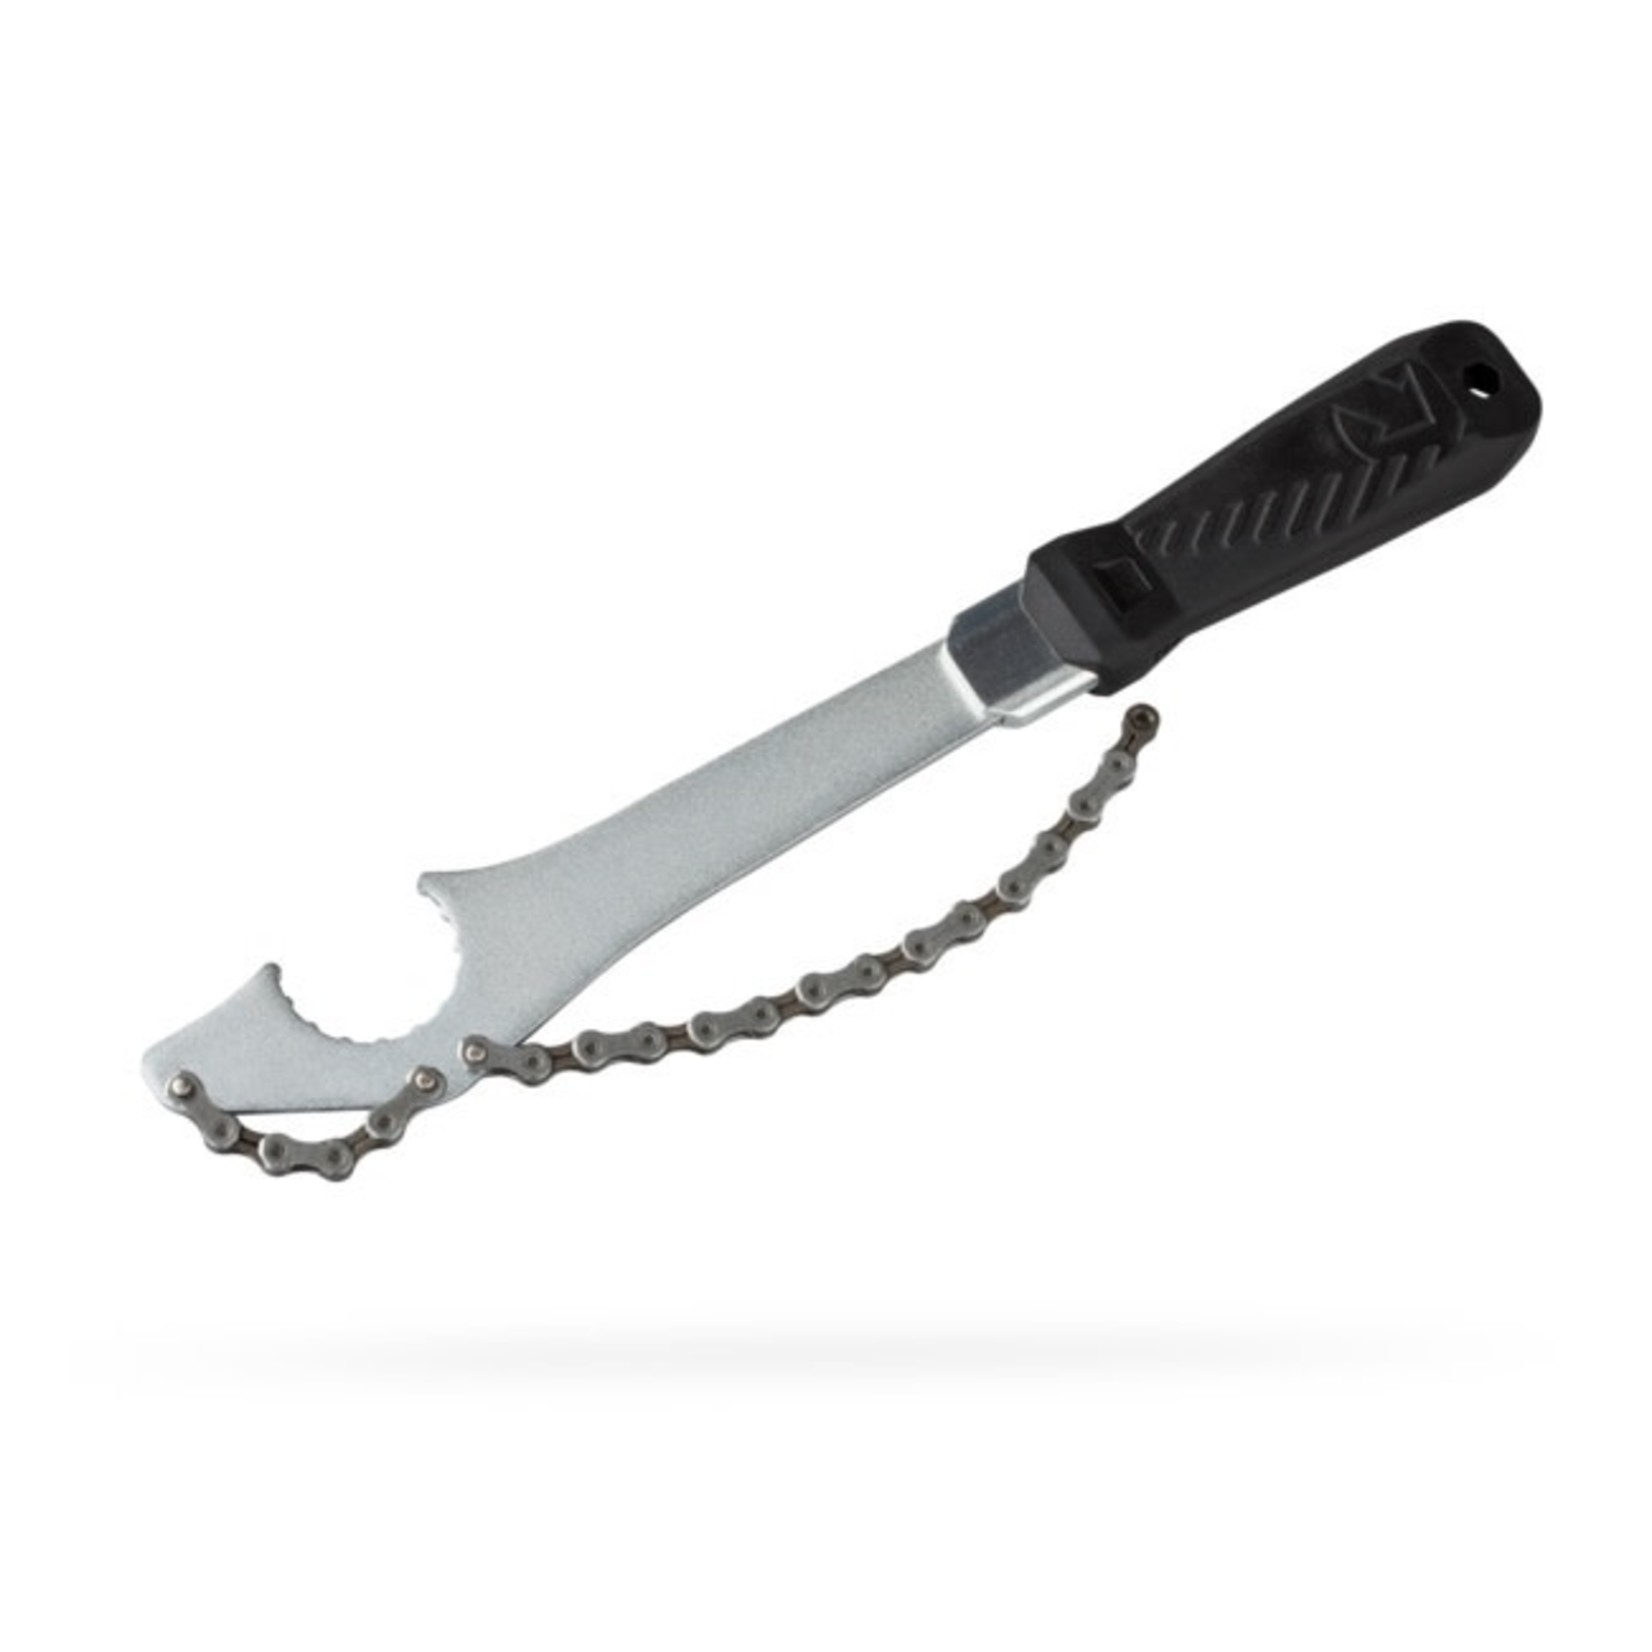 PRO Pro Team Chainwhip Tool with 39-40mm, 16 notch BB Wrench